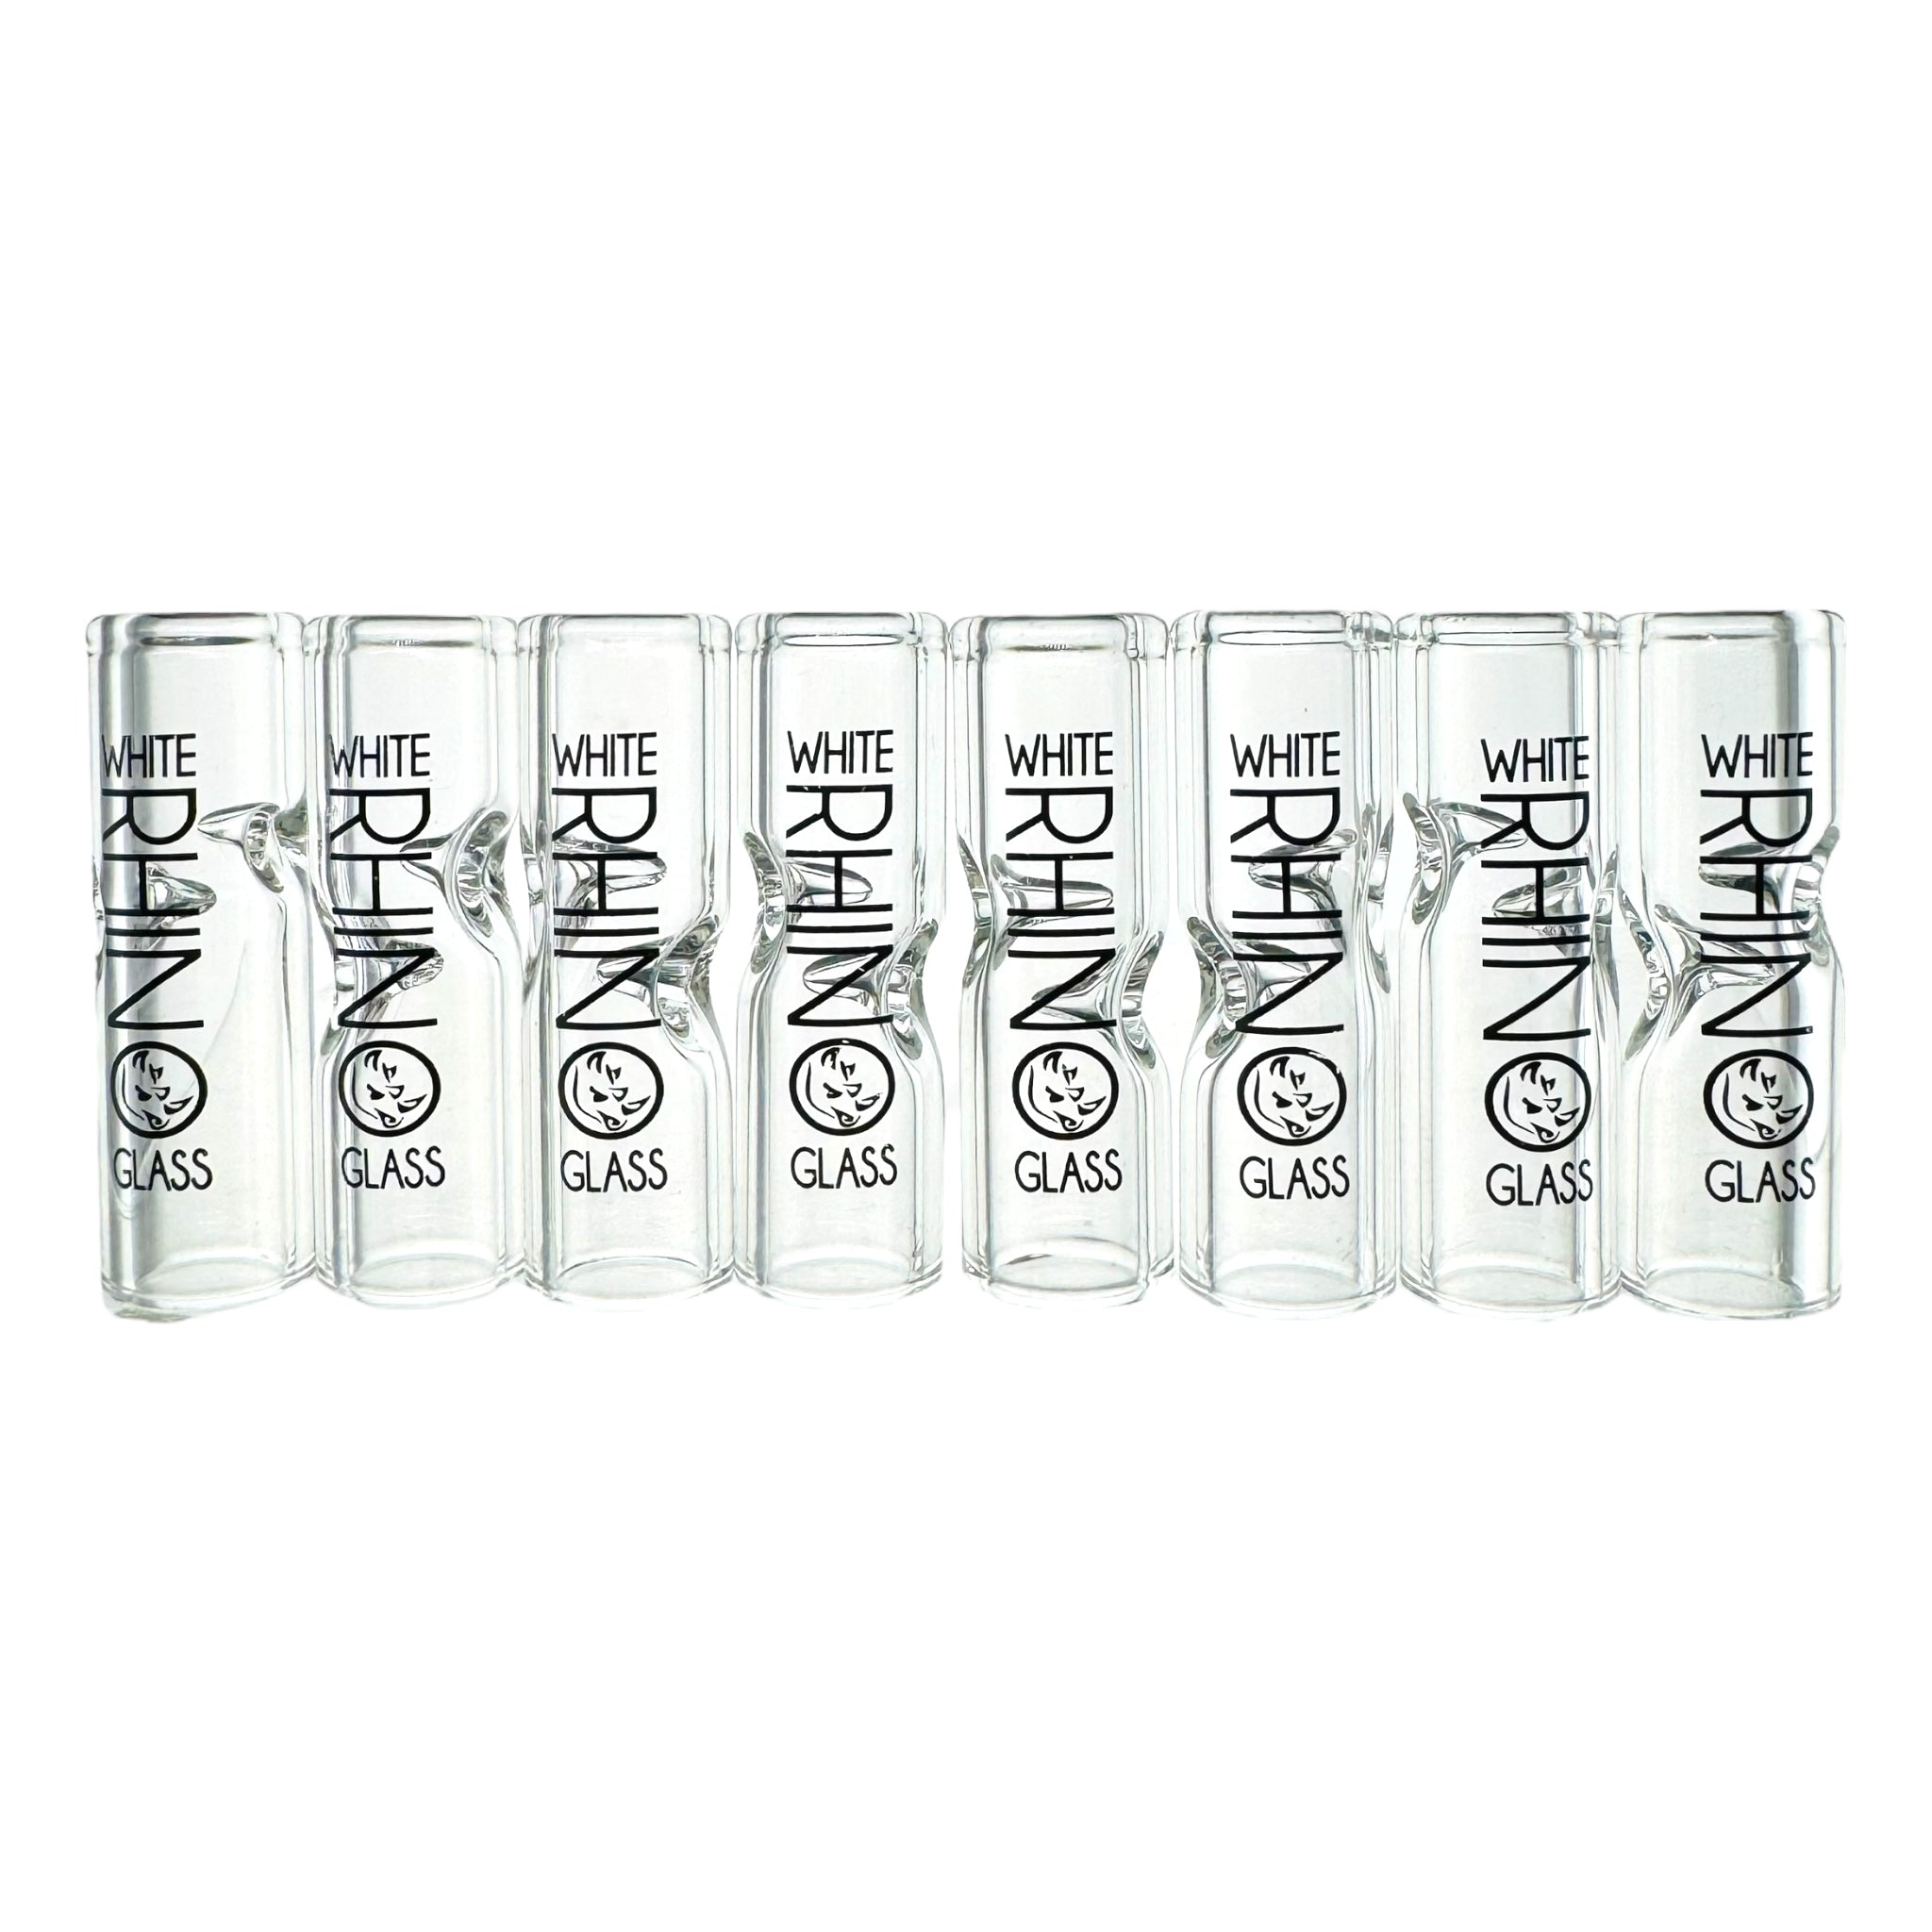 glass joint blunt filter tips for sale online free shipping